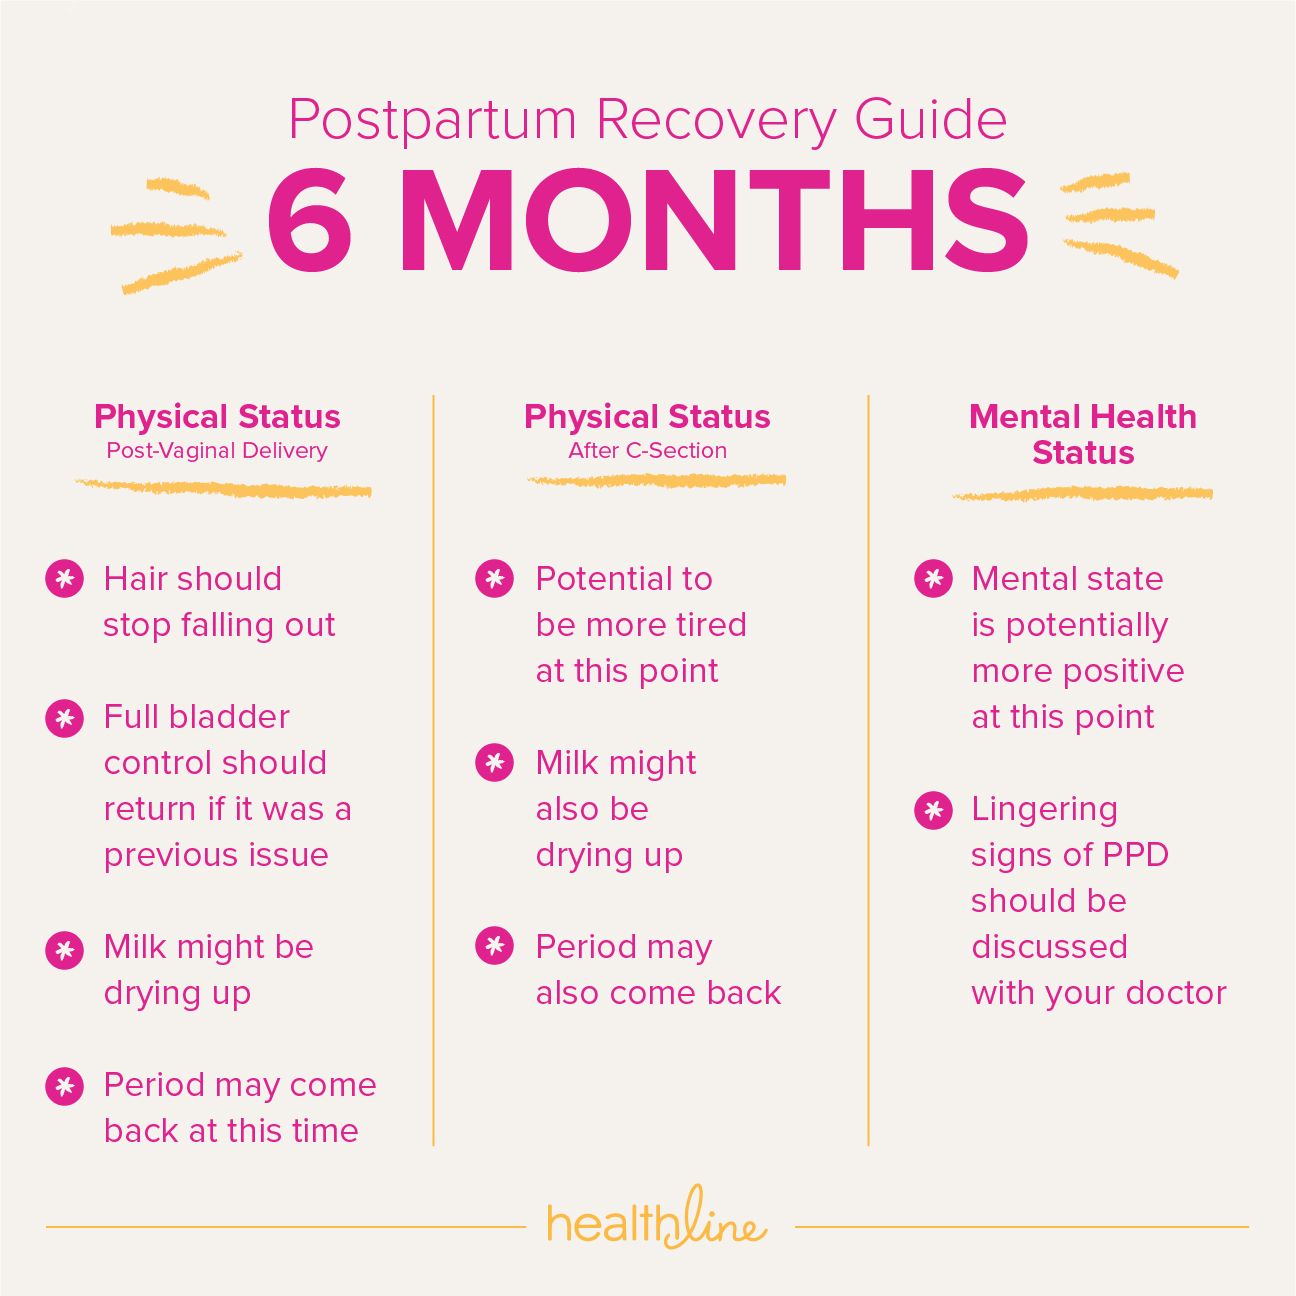 C-Section Recovery Timeline 